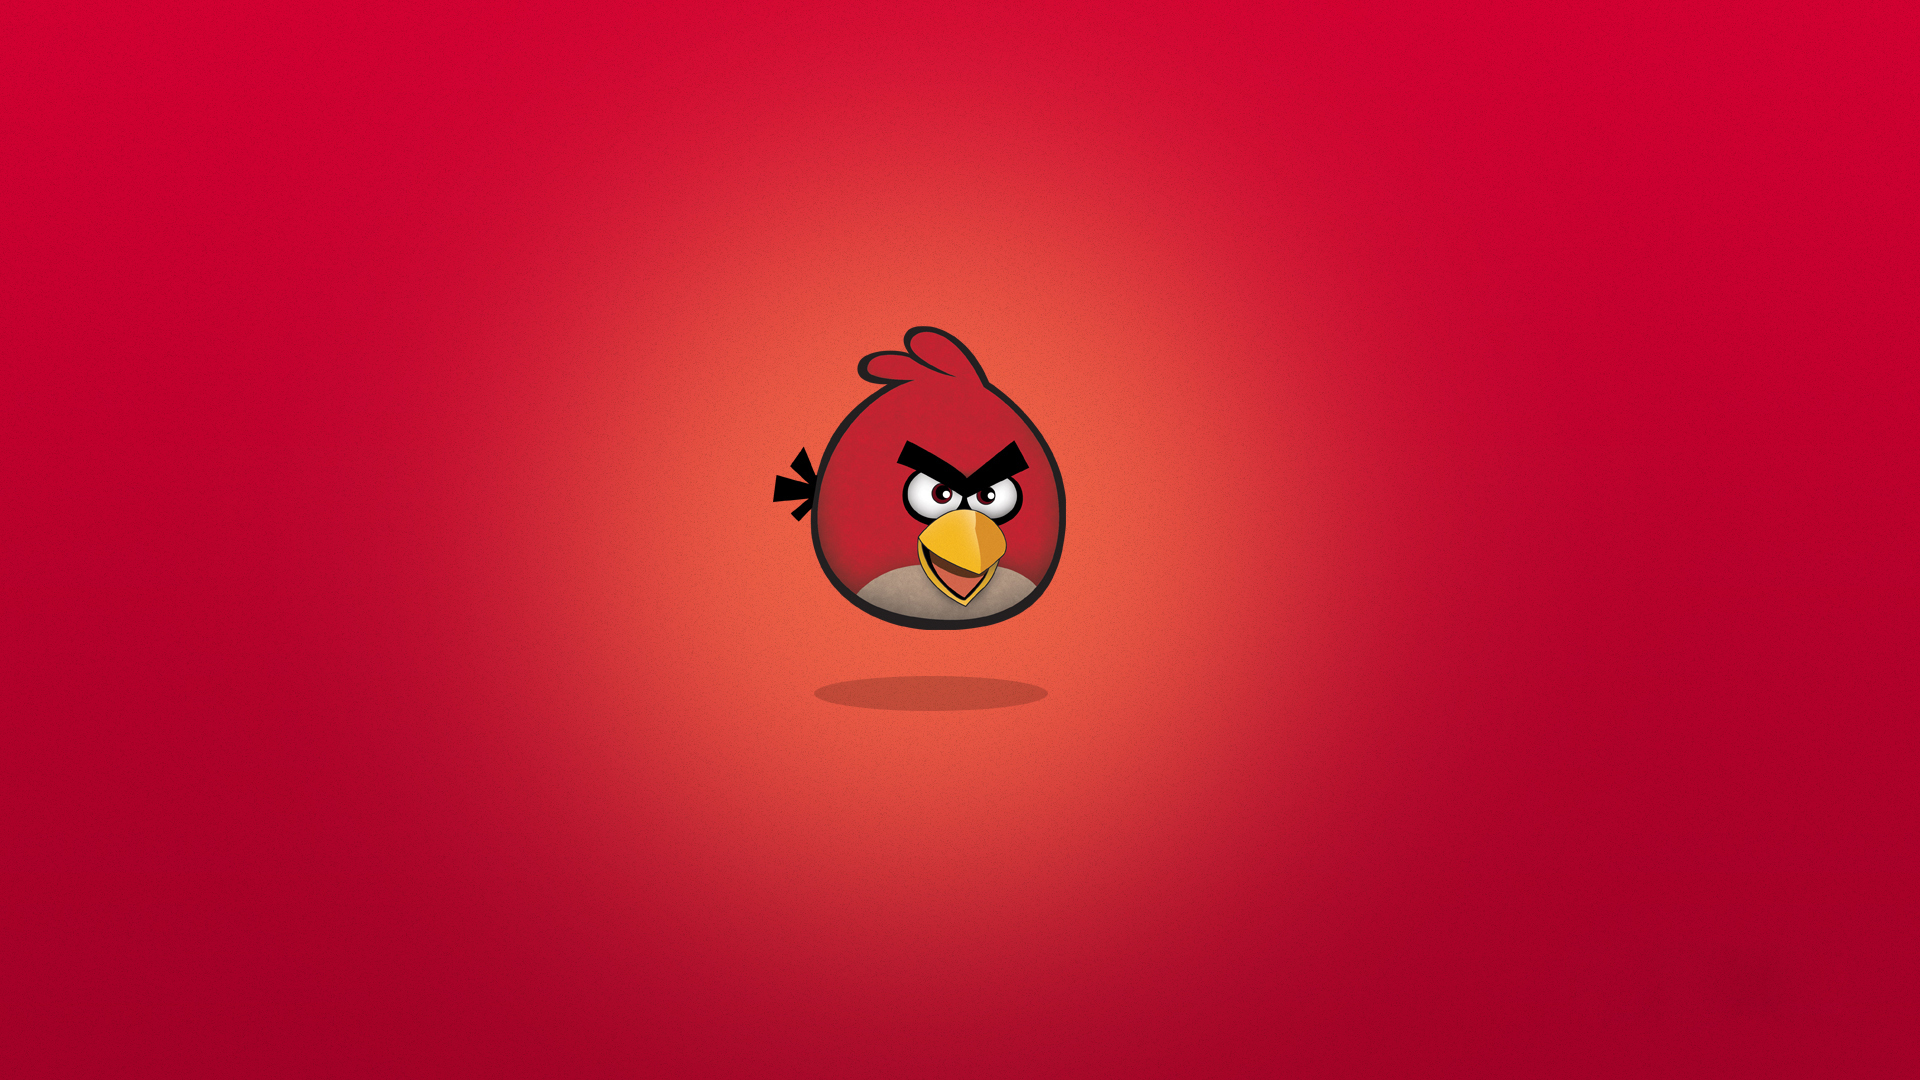 2 Angry Birds 2 HD Wallpapers | Backgrounds - Wallpaper Abyss